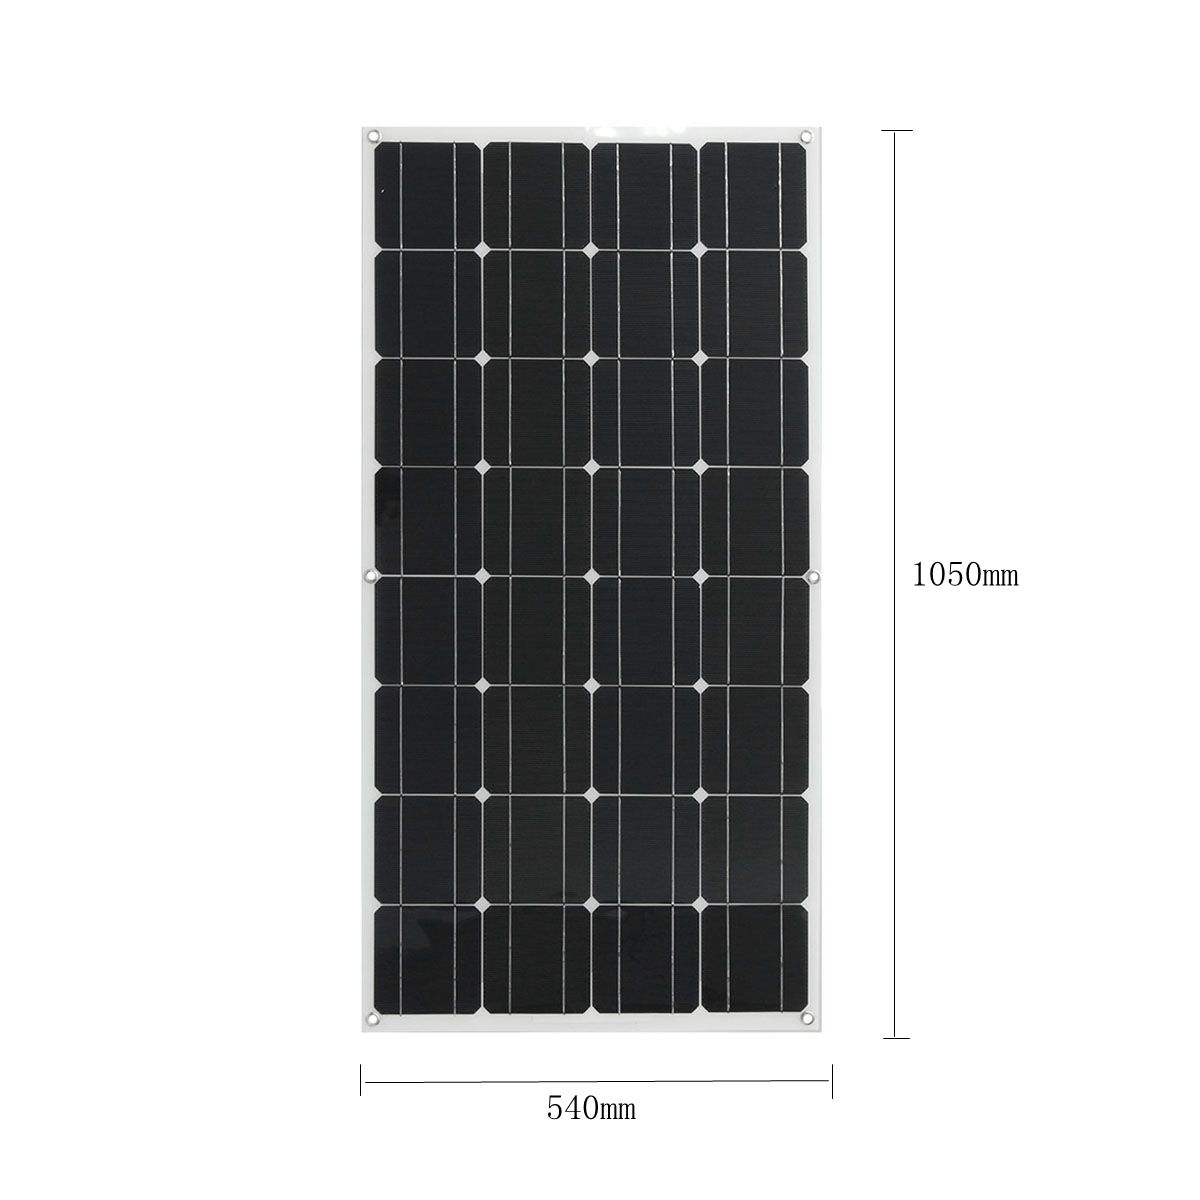 Elfeland® SP-38 18V 100W 1050x540x2.5mm Flexible Solar Panel With 1.5m Cable 14